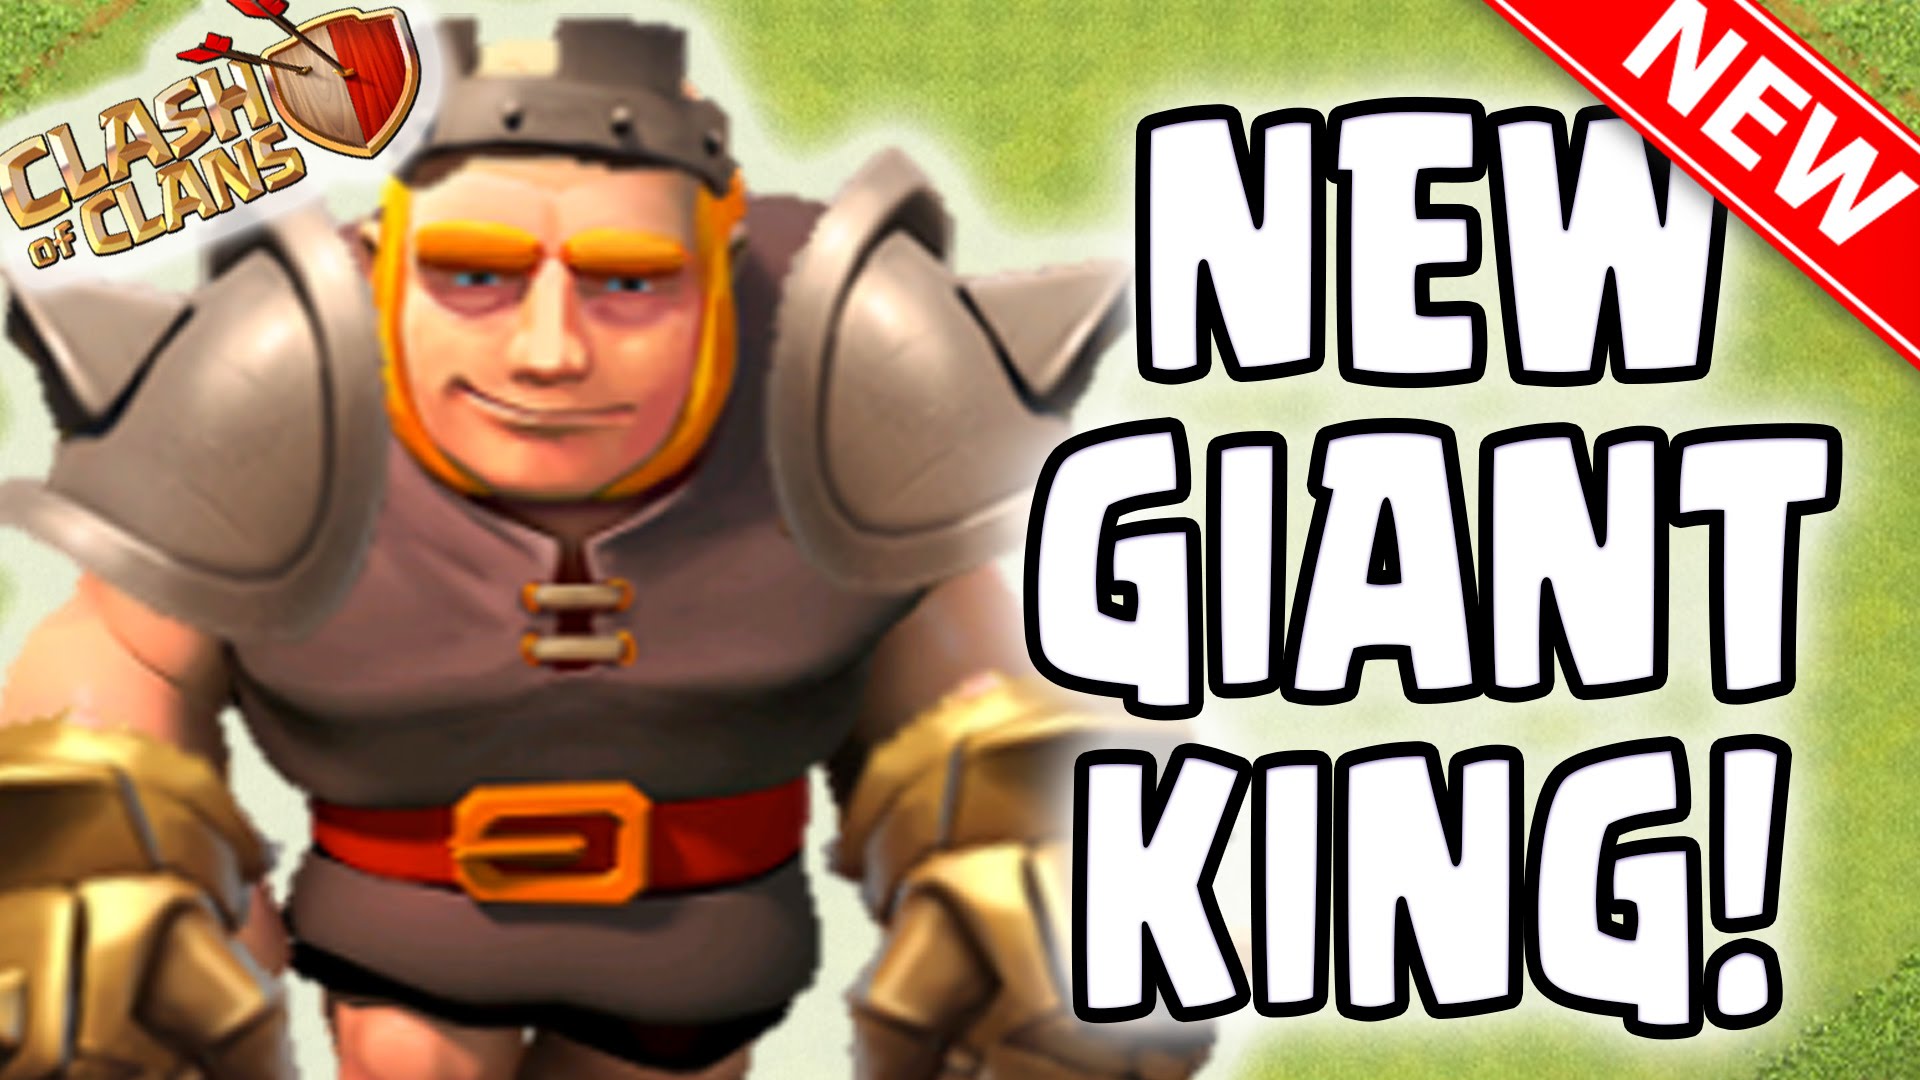 Clash Of Clans Max Level Giants King - HD Wallpaper 